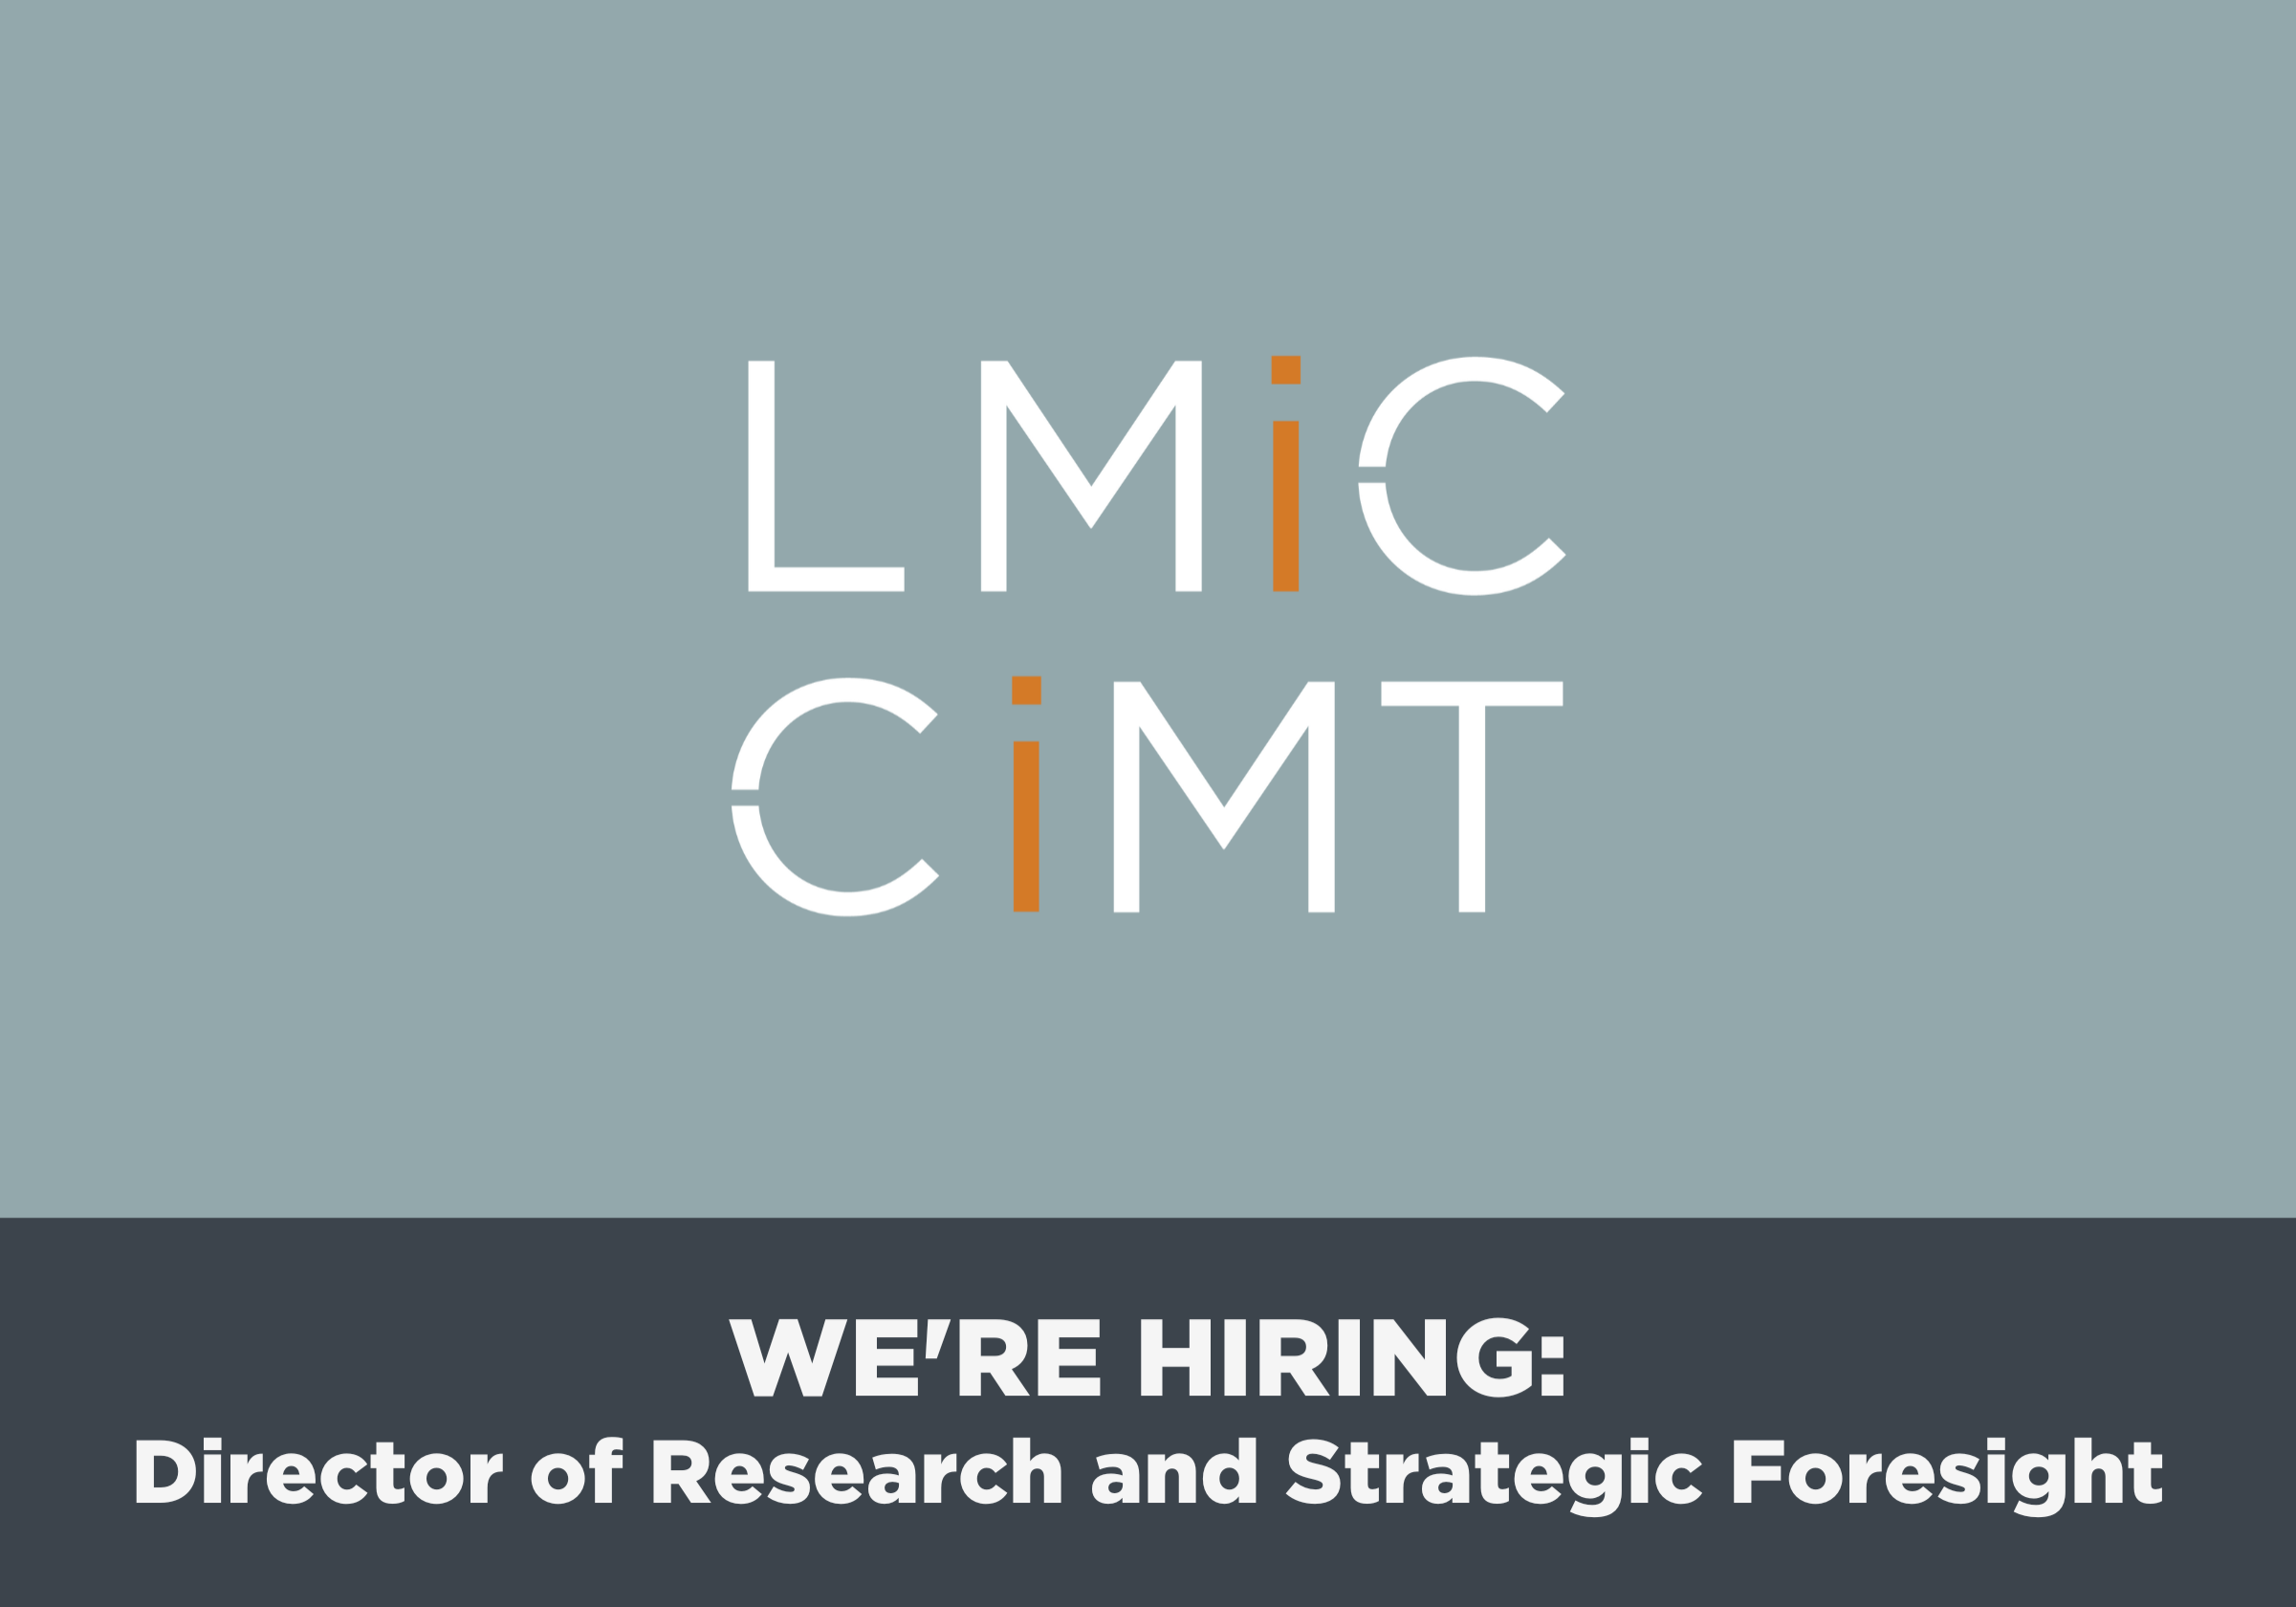 LMIC logo - we're hiring a Director of Research and Strategic Foresight.